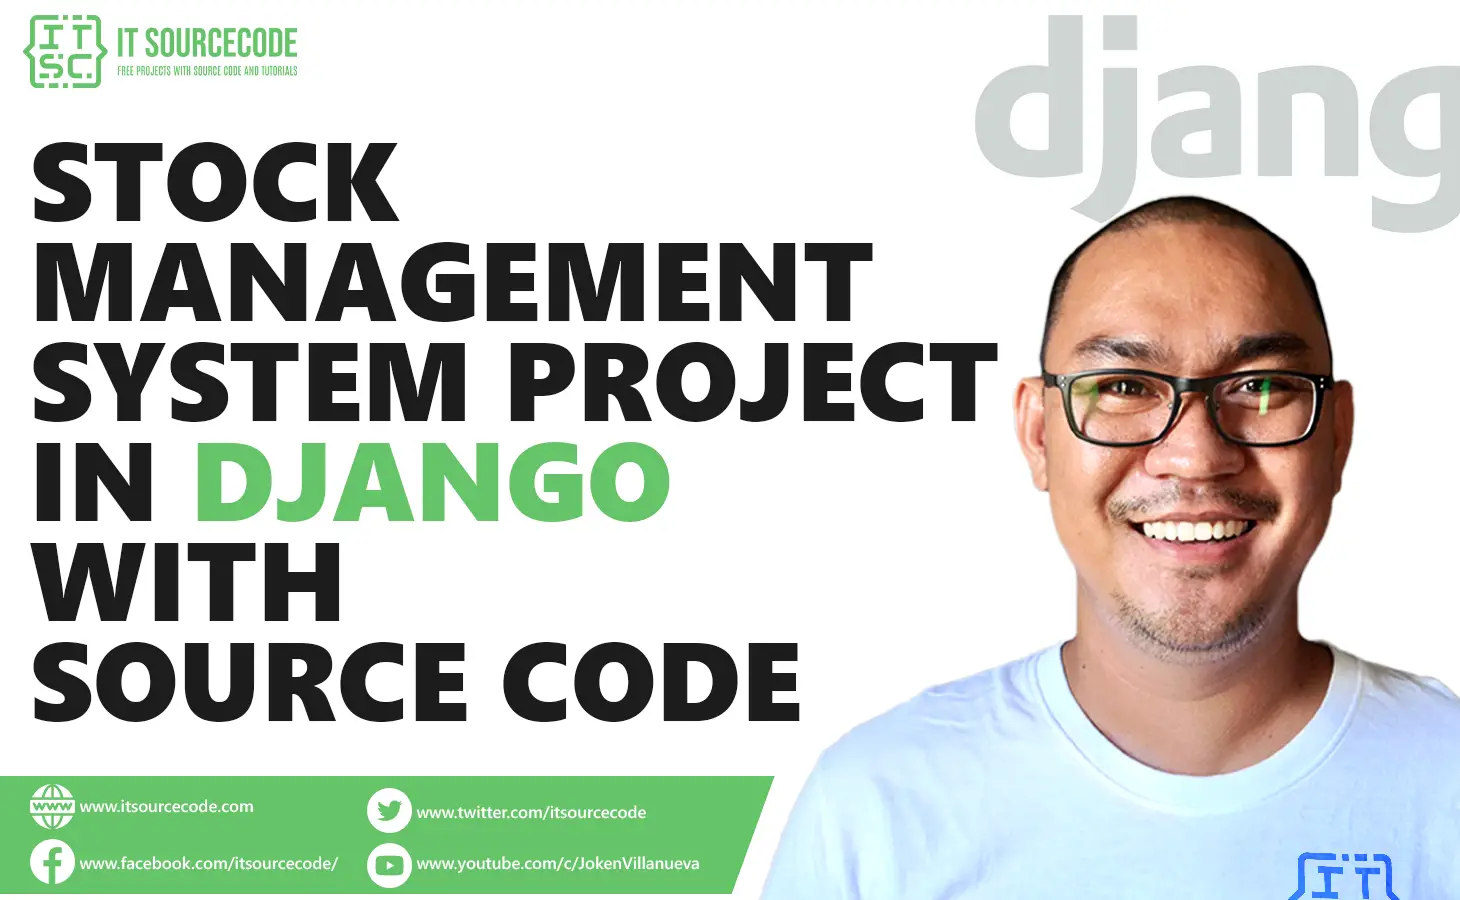 Stock Management System Project in Django with Source Code